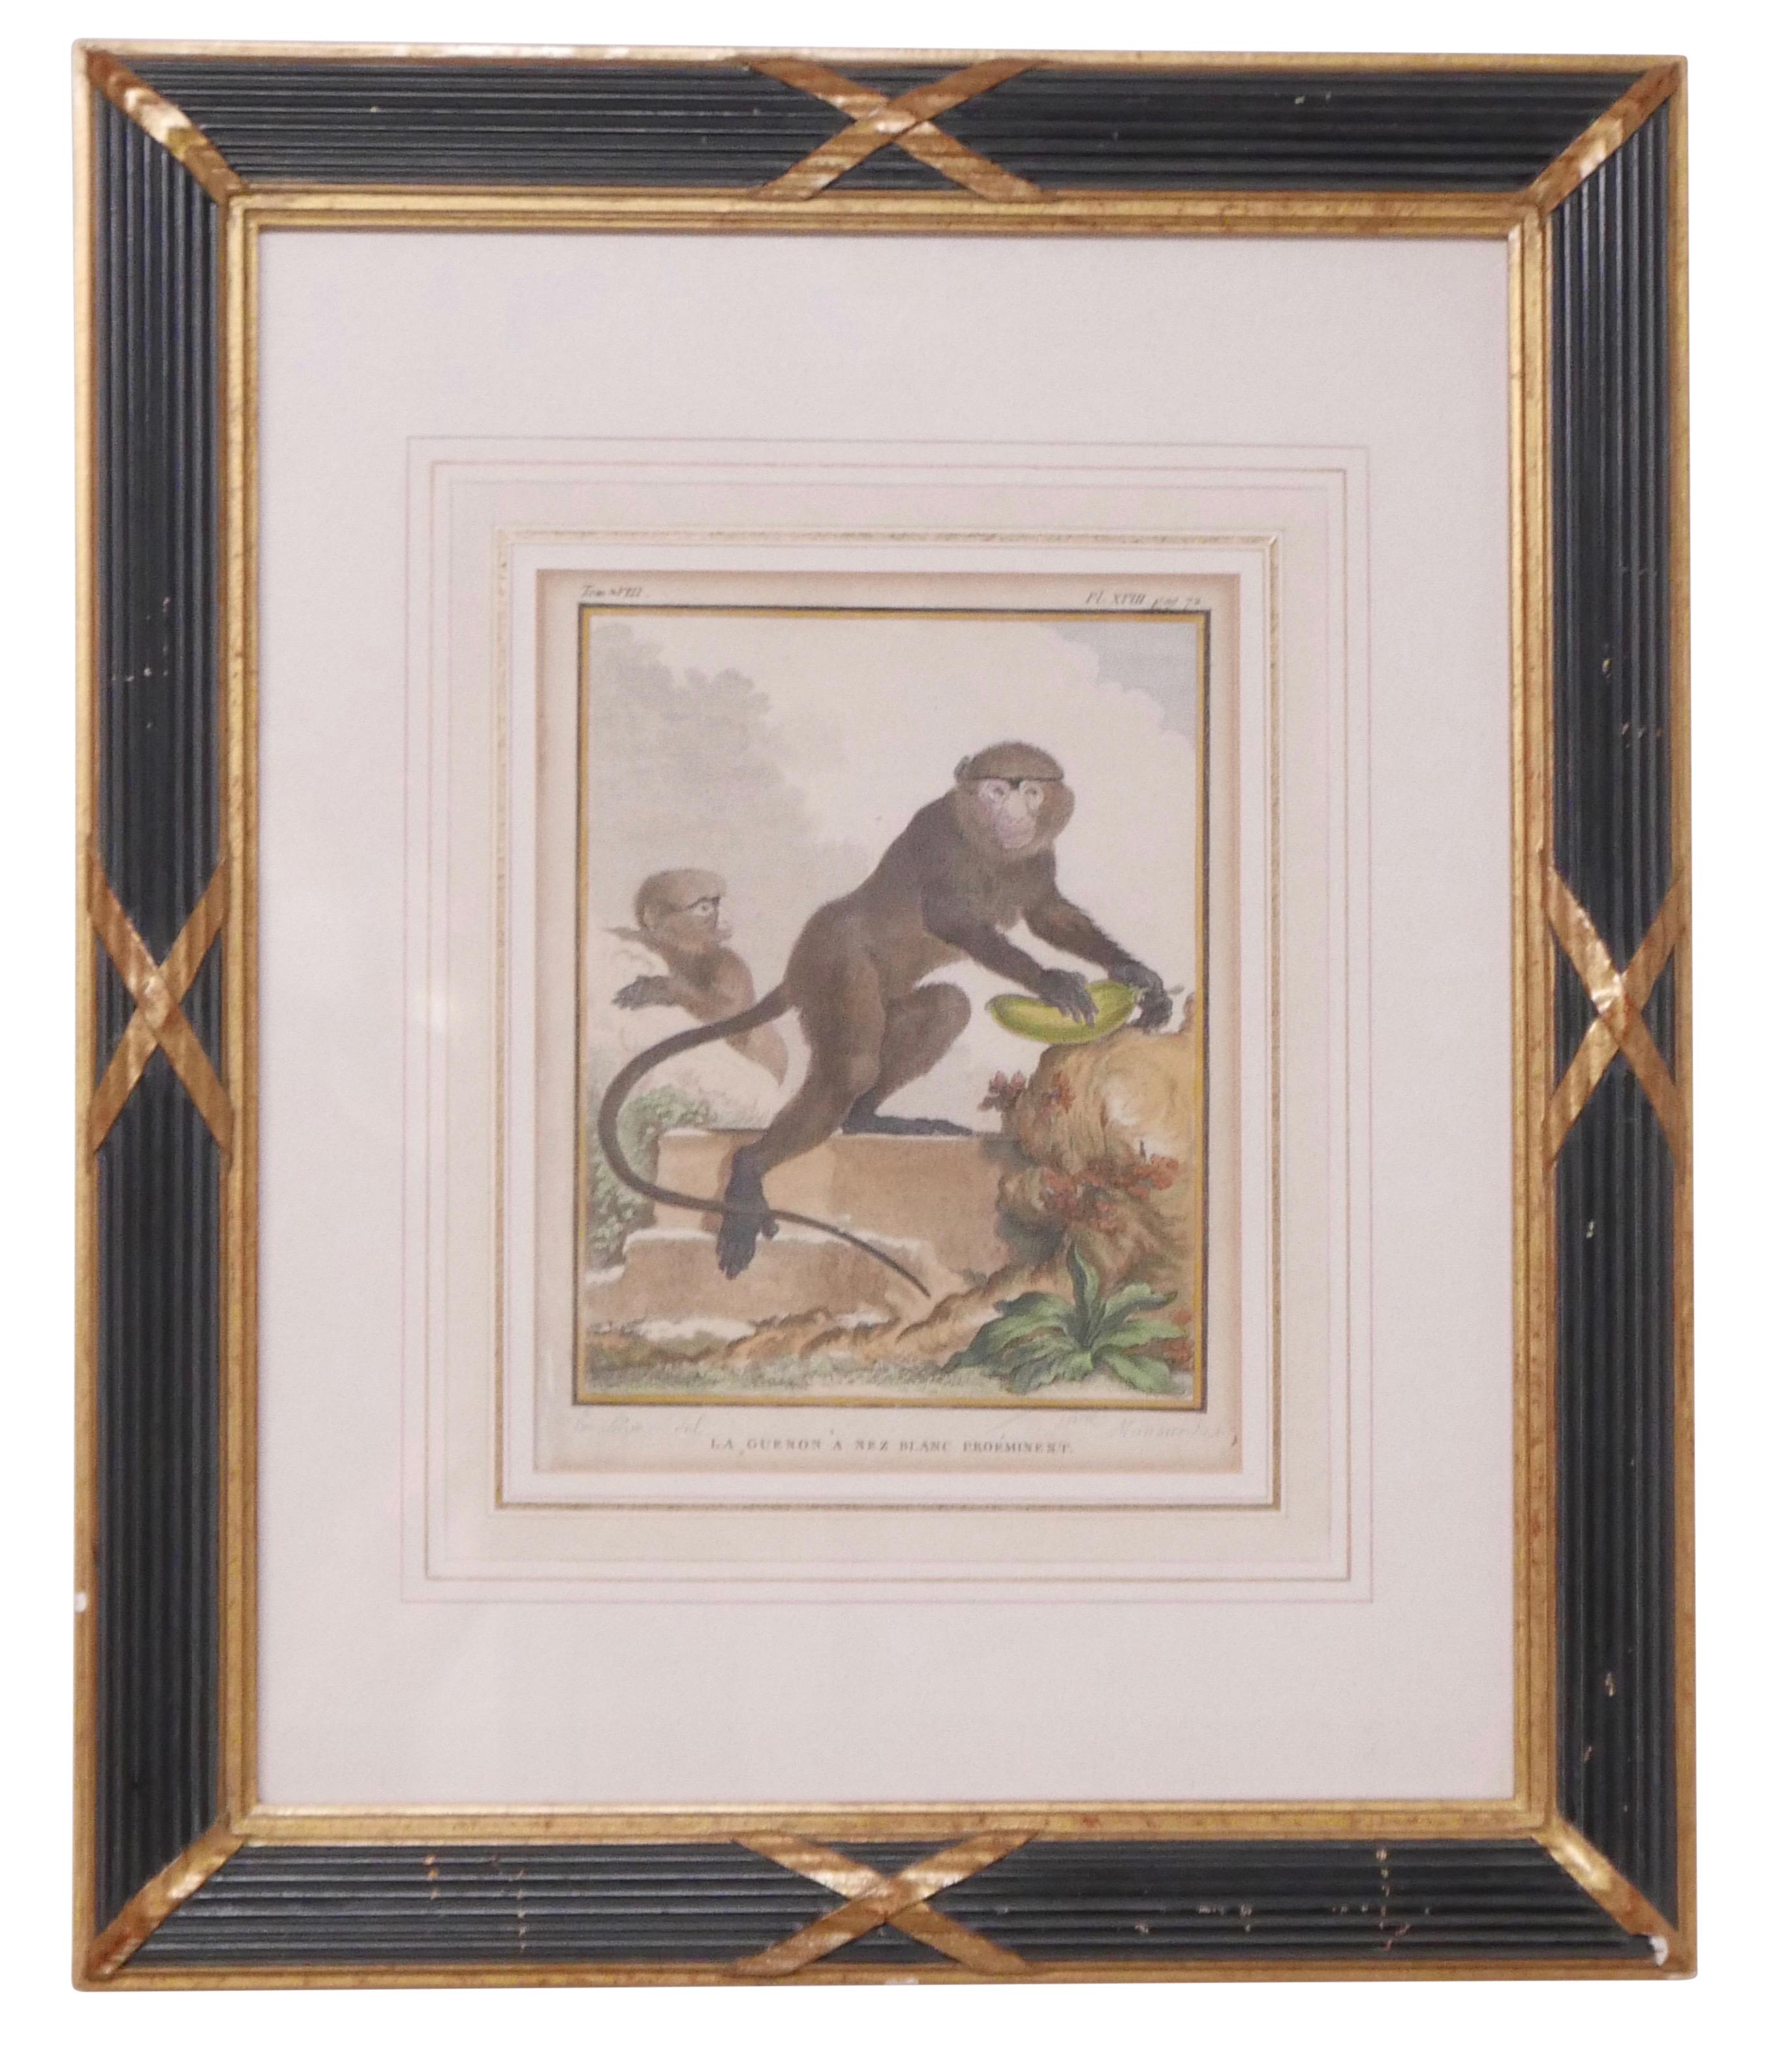 Three Framed Antique Hand Colored Monkey Engravings - Early 19th Century 1